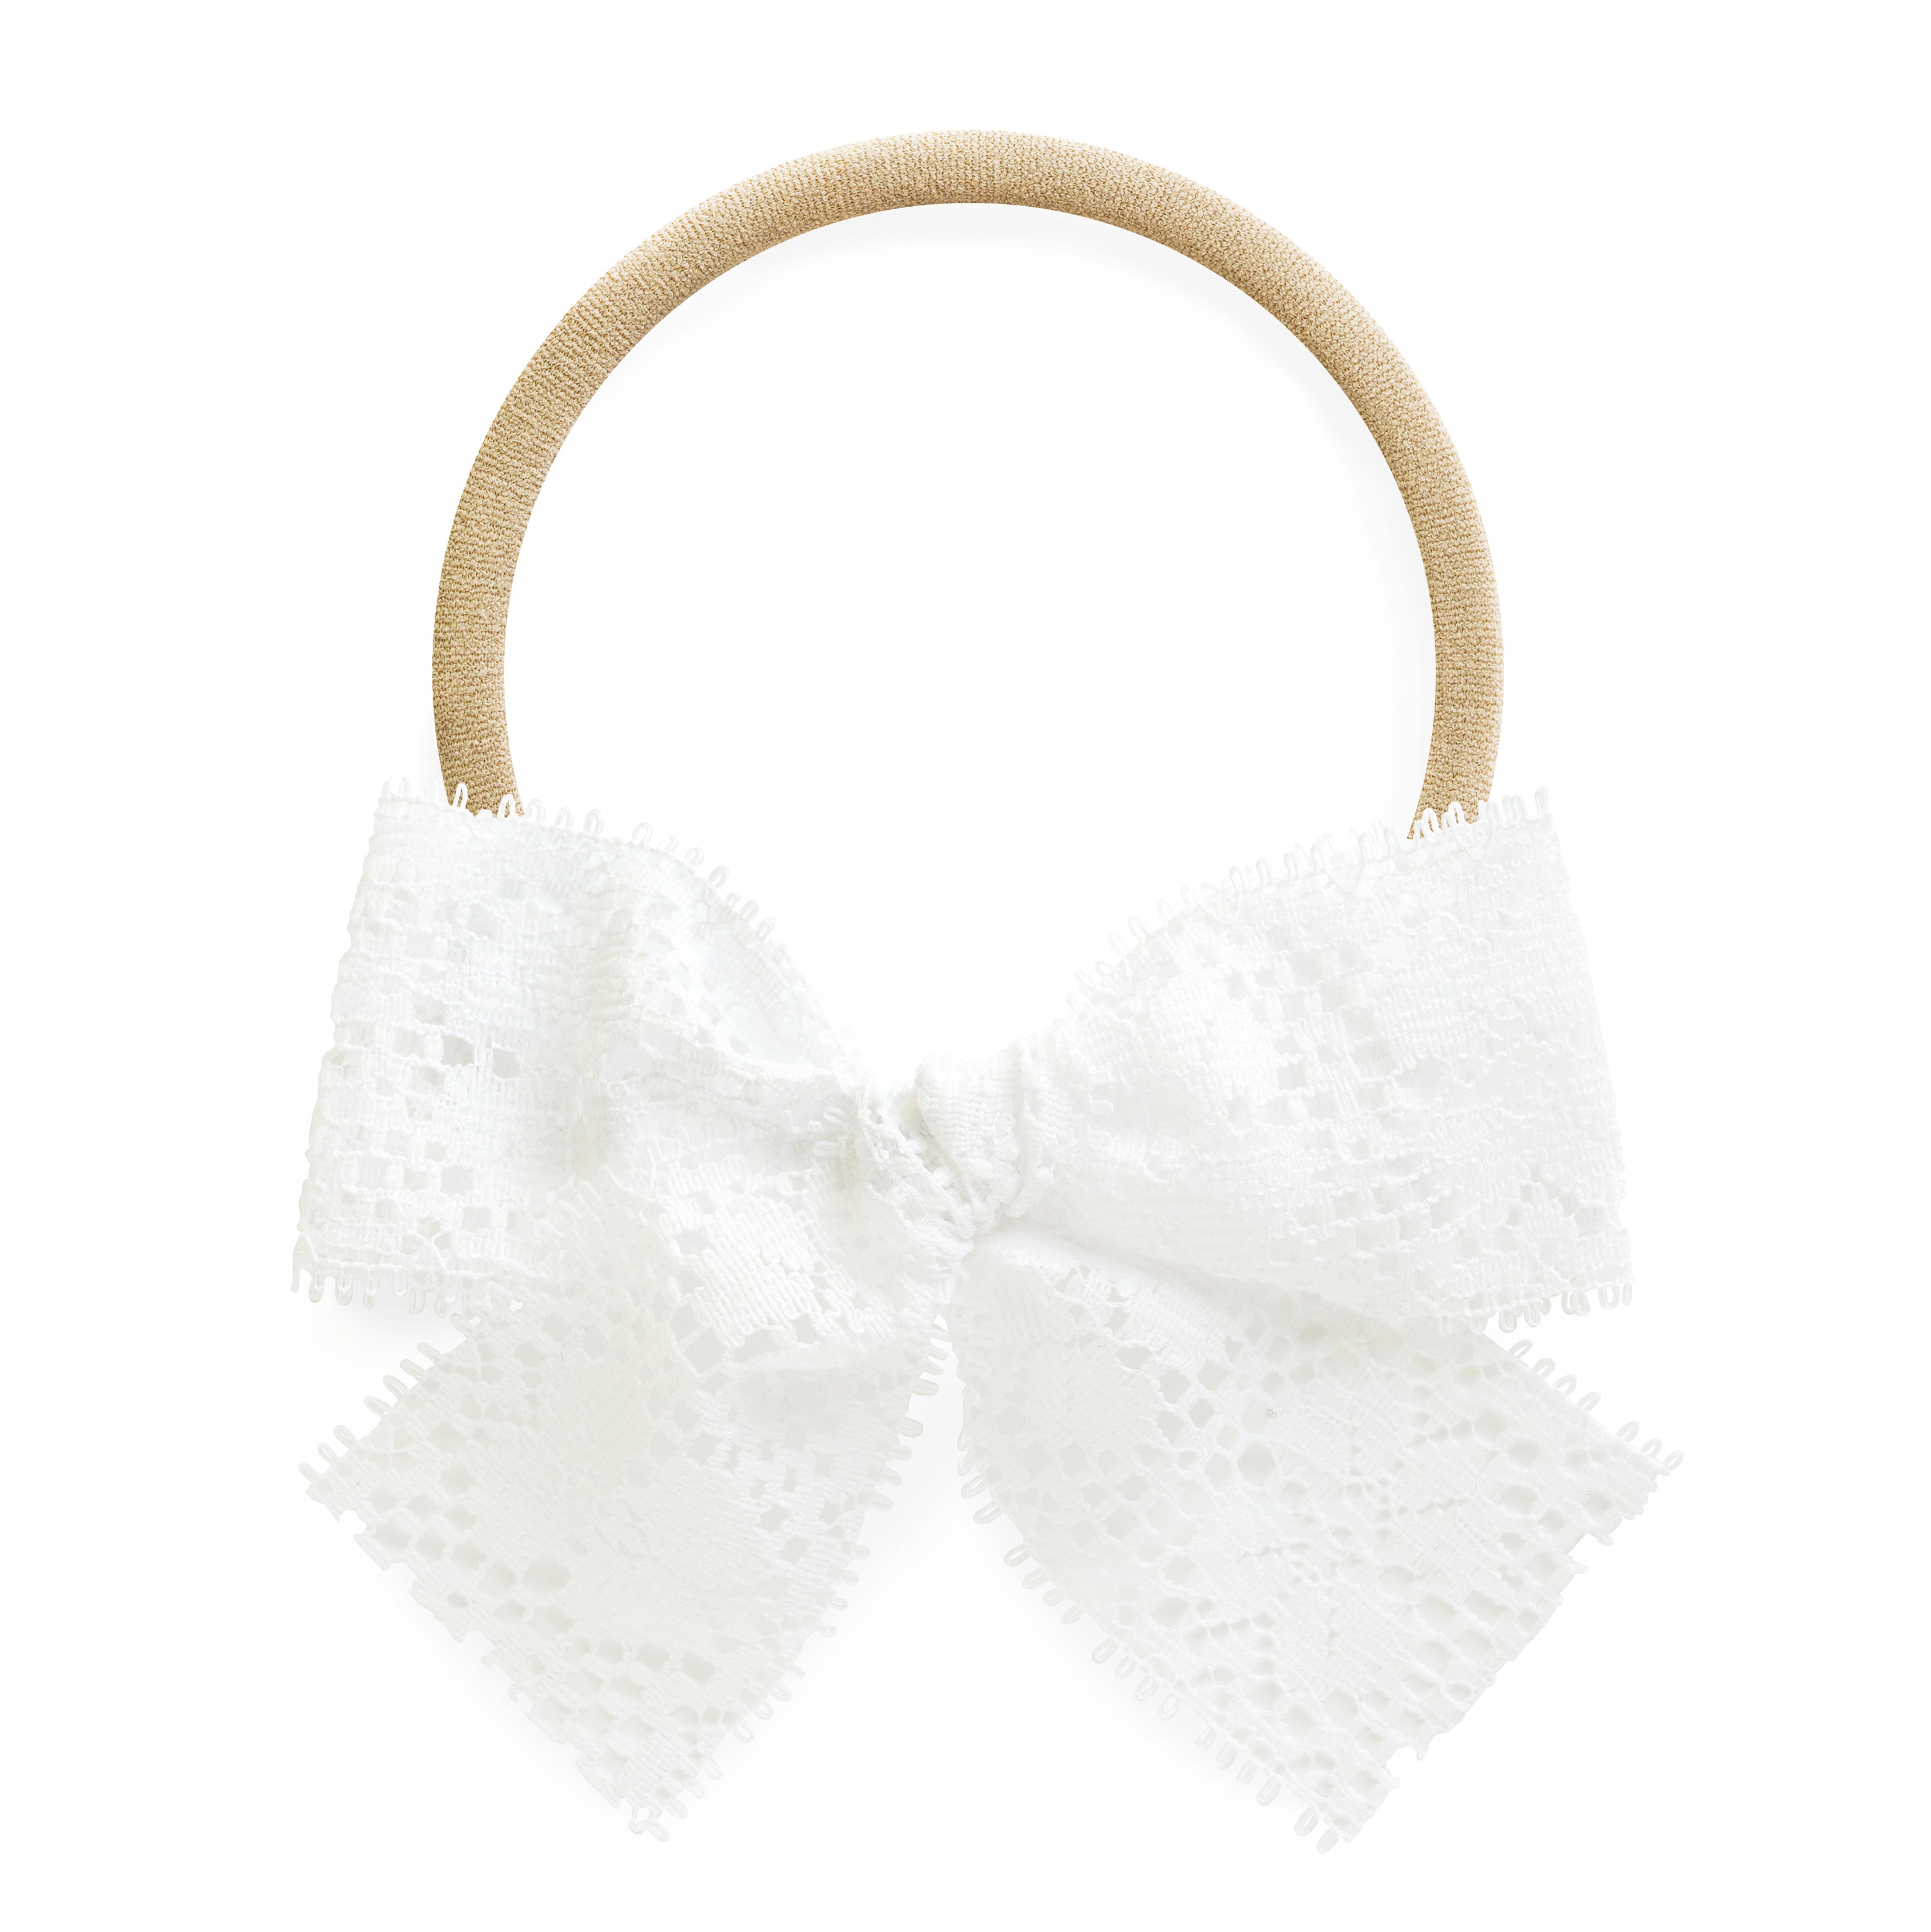 Off-White Large Lace Hair Bows for Girls, Hair Clips for Women